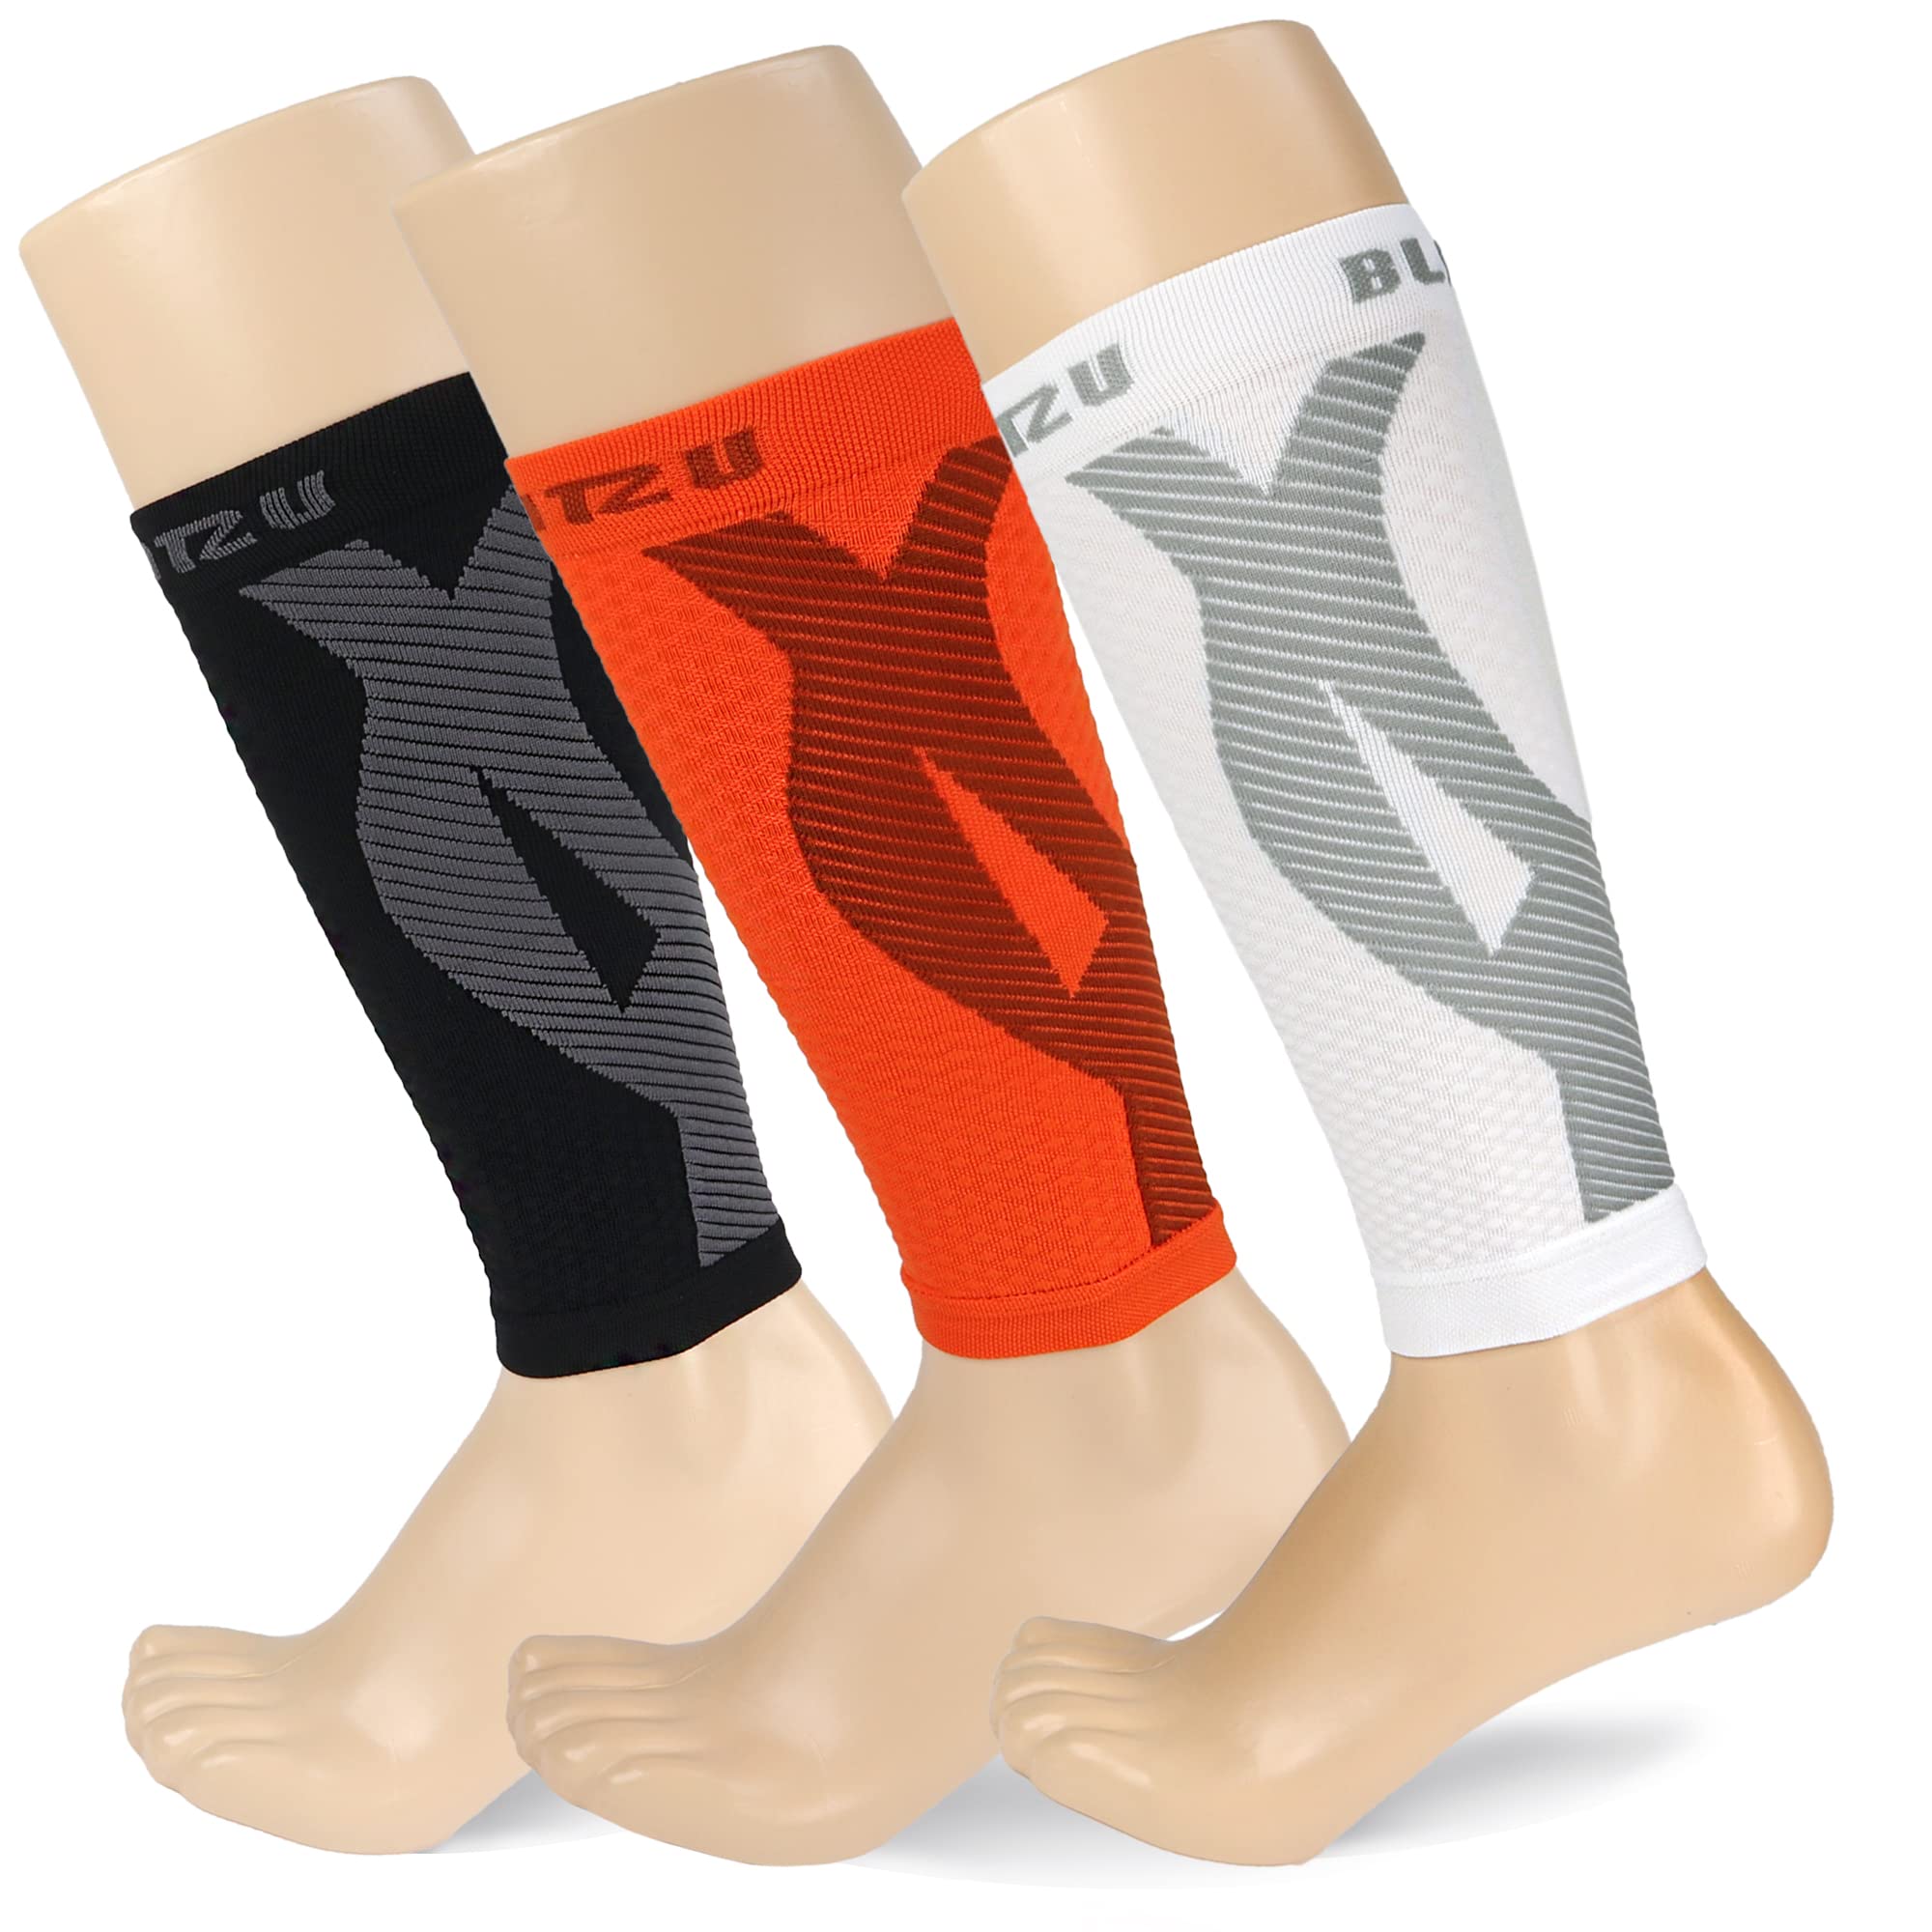 BLITZU 3 Pairs Calf Compression Sleeves for Women and Men Size L-XL, One  Orange, One Black, One White Calf Sleeve, Leg Compression Sleeve for Calf  Pain and Shin Splints. Footless Compression Socks.